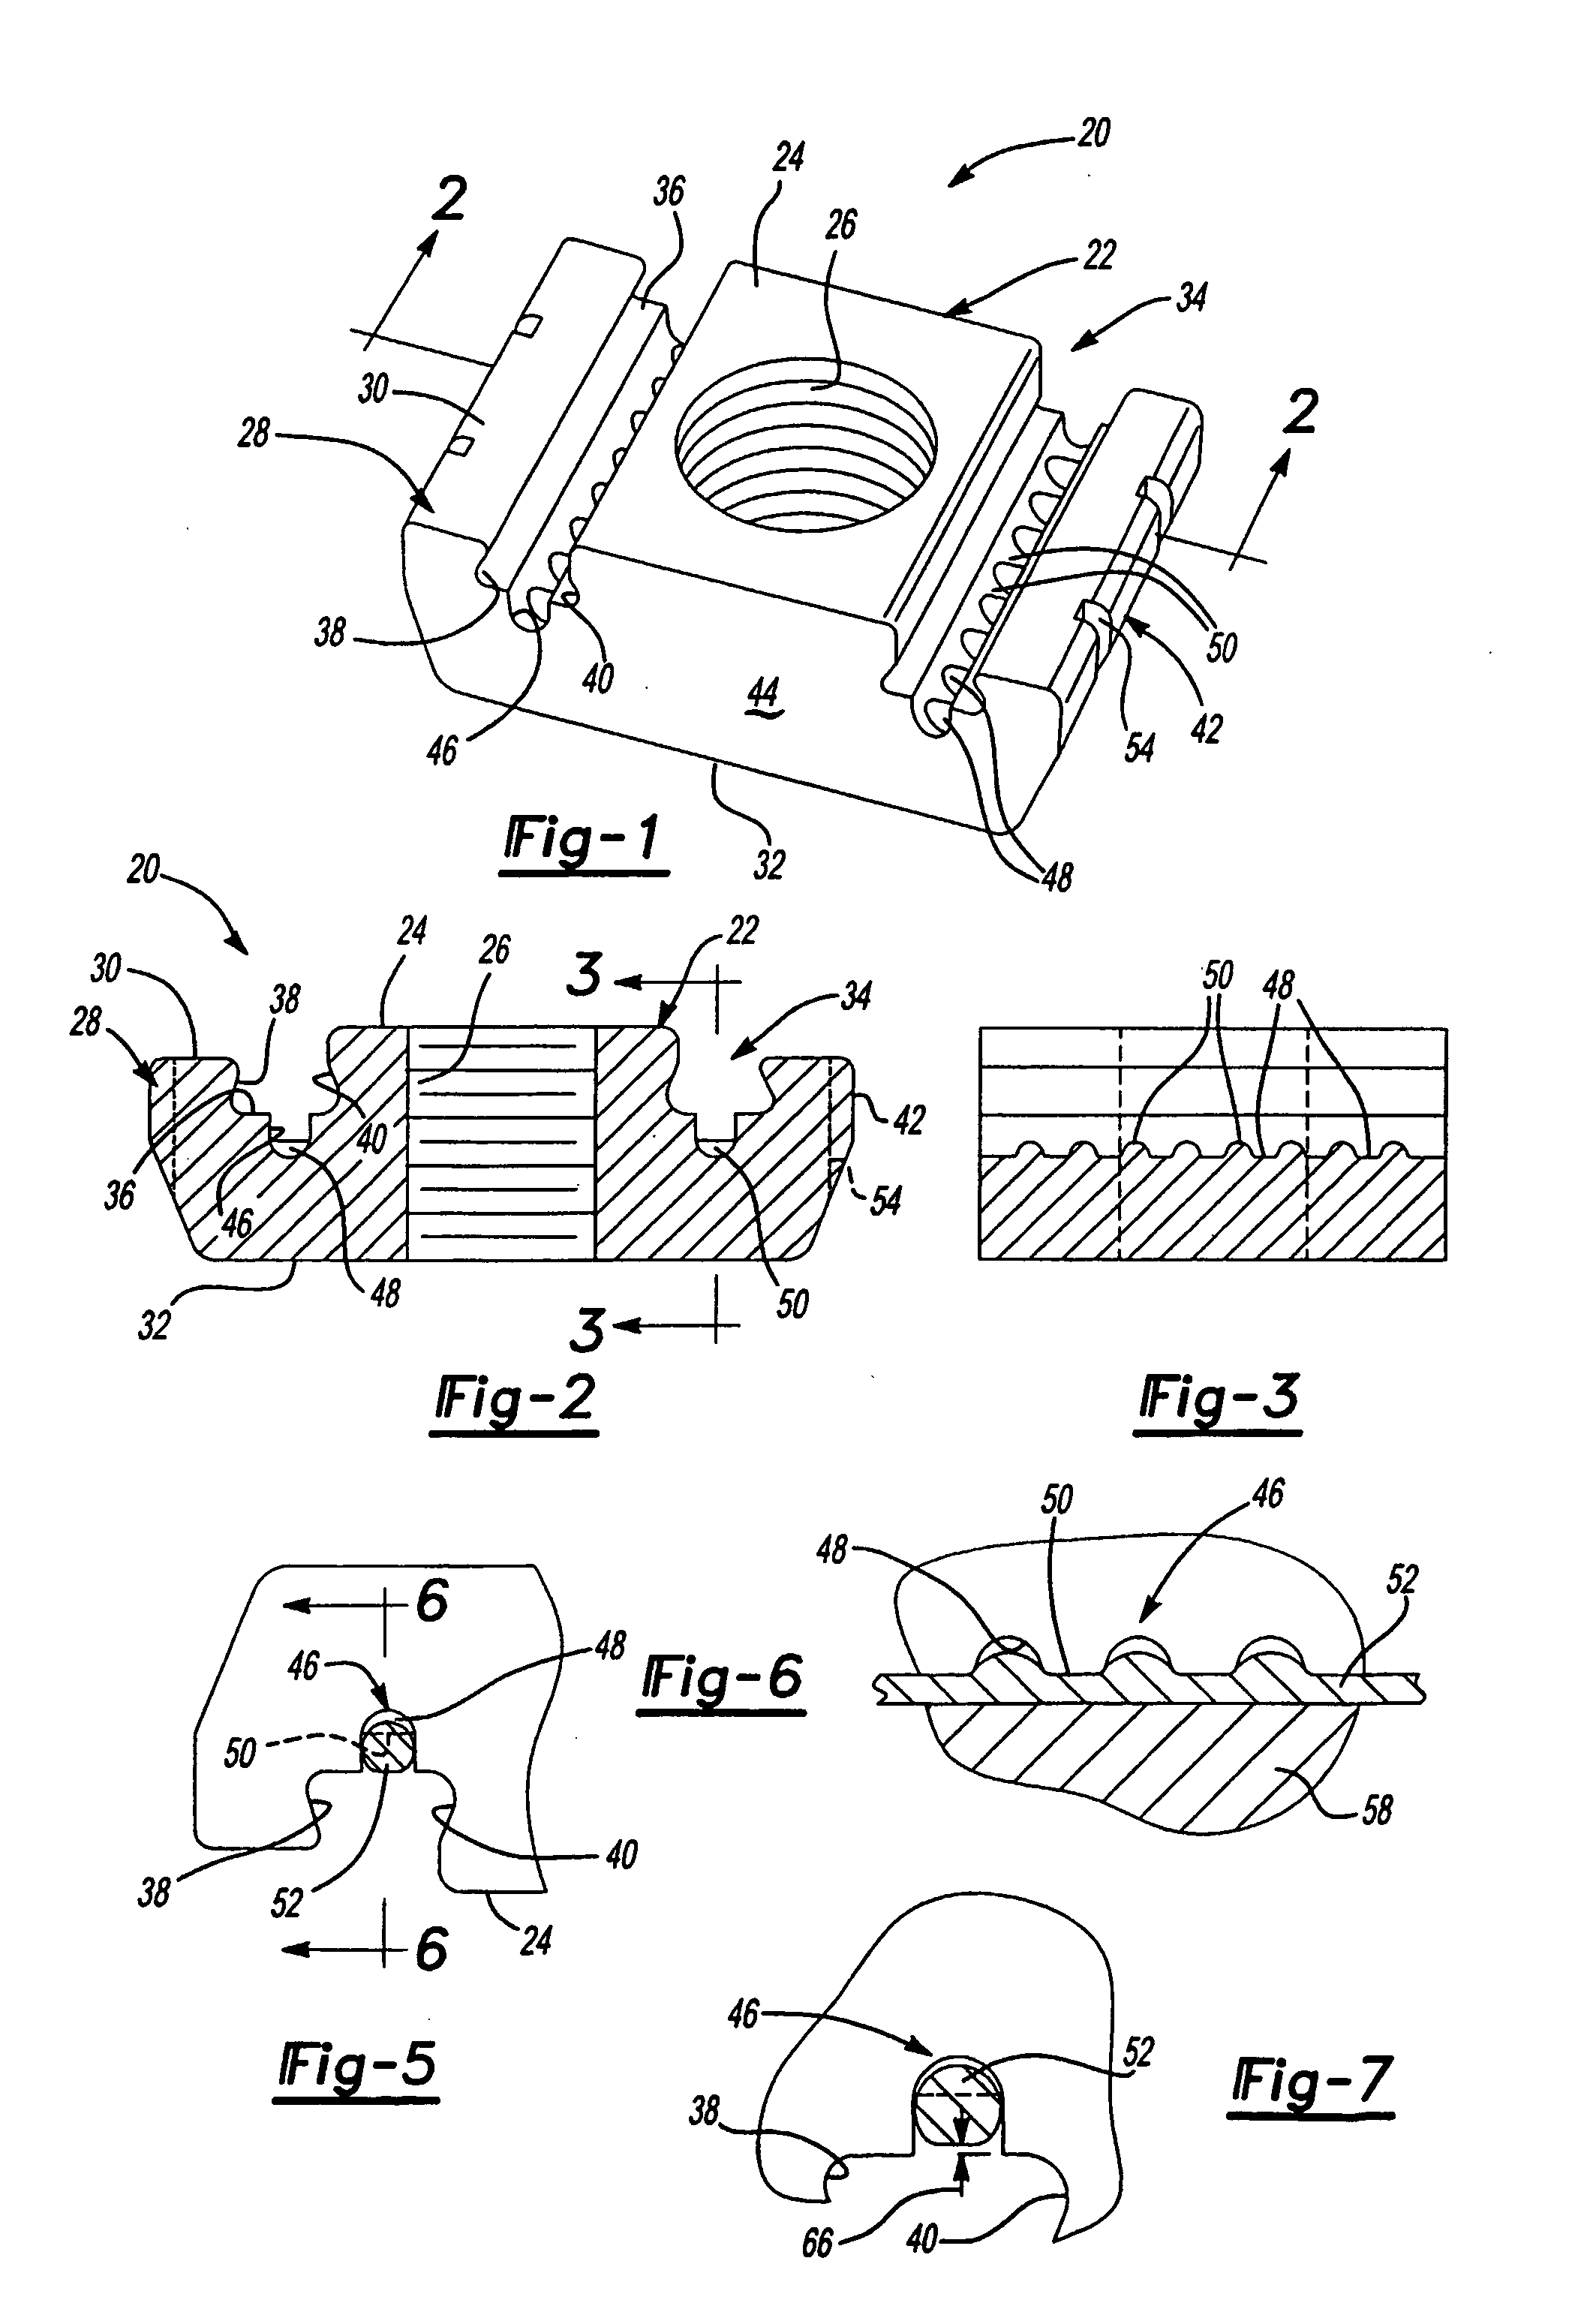 Self-attaching fastener systems